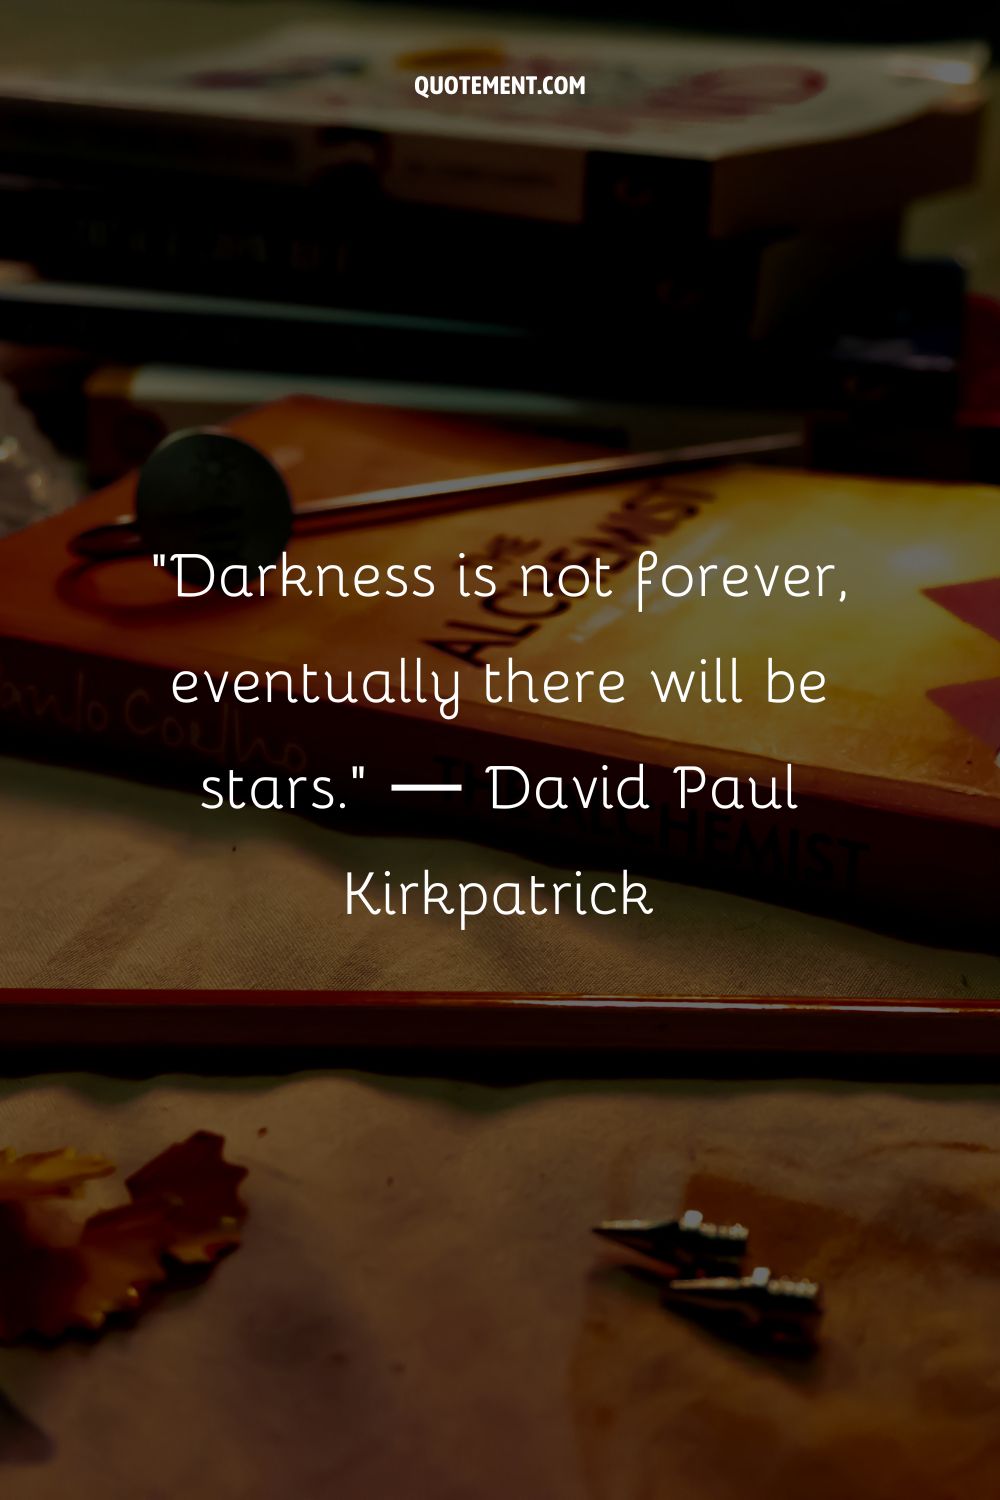 Darkness is not forever, eventually there will be stars